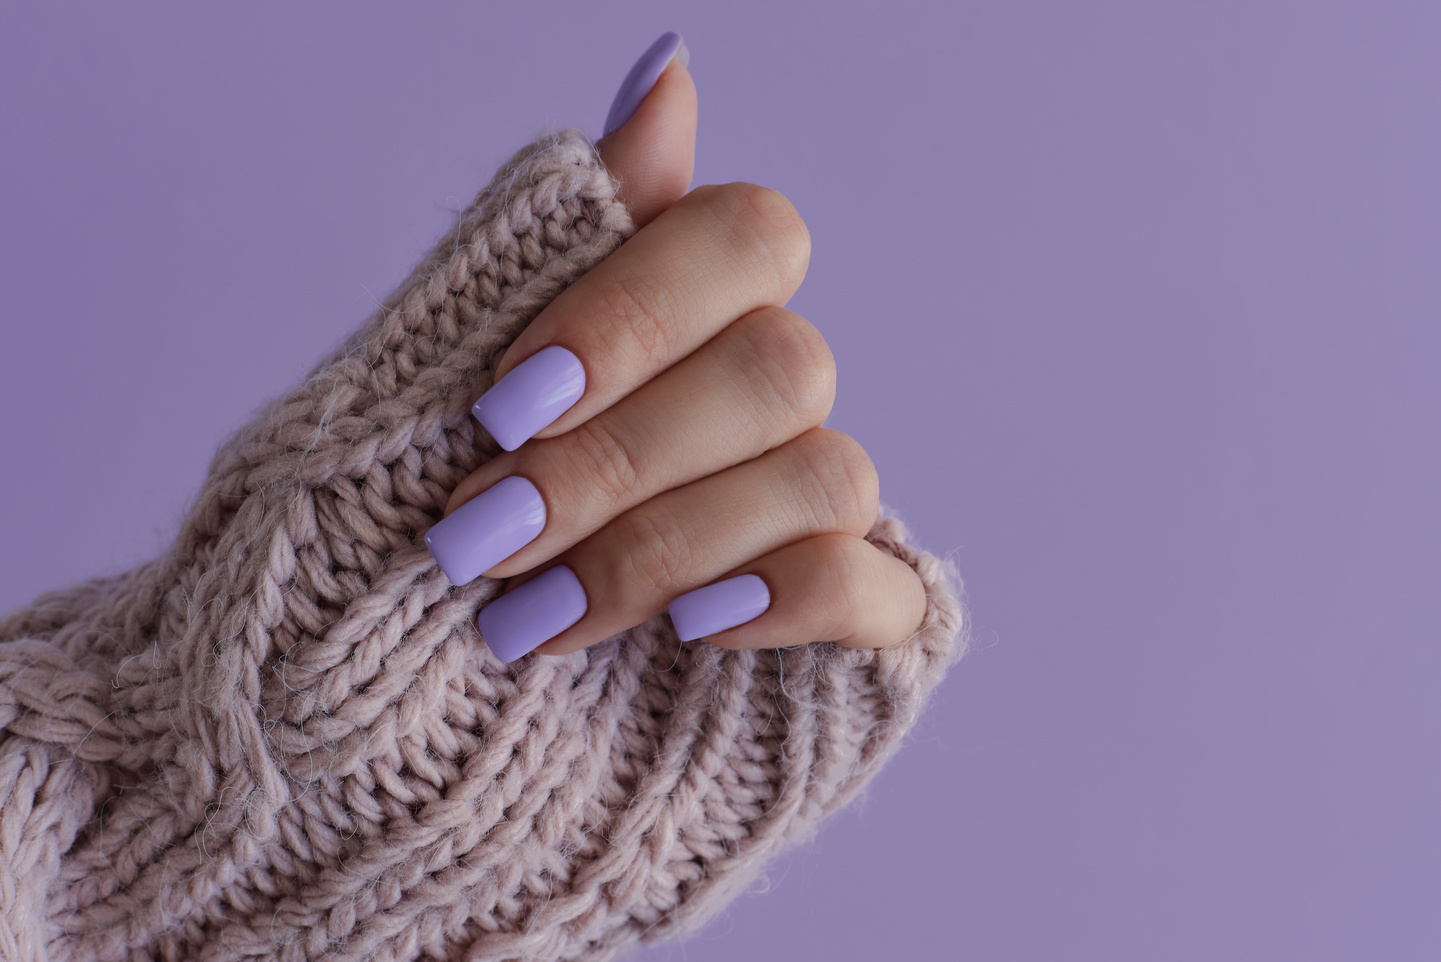 Female's hand with delicate nails of trendy lavender color